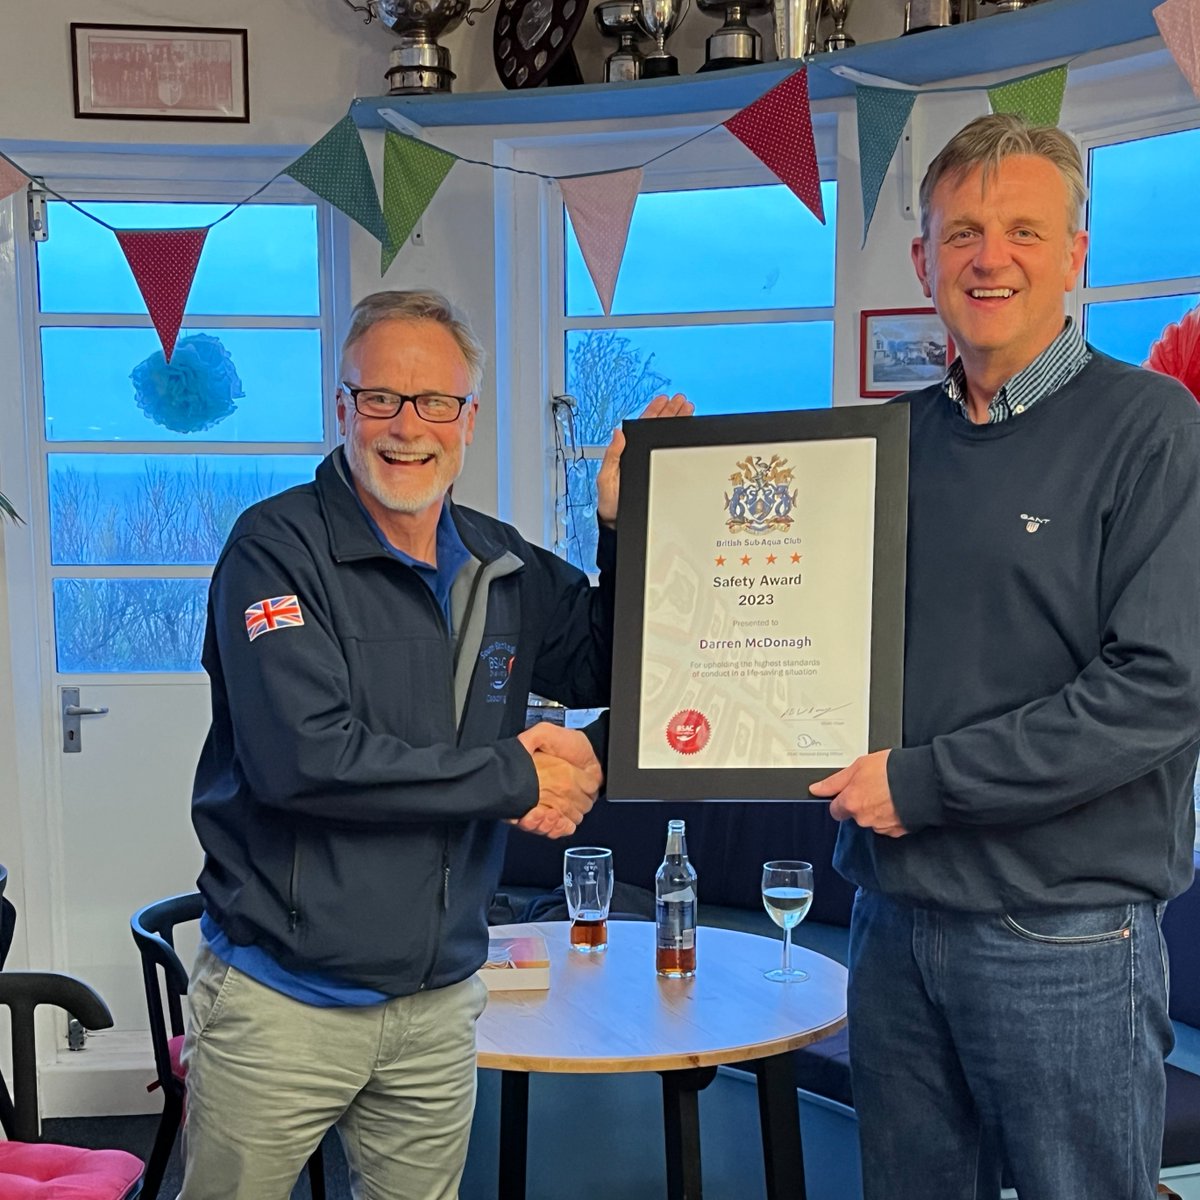 Congratulations to Darren McDonagh of Worthing BSAC, who this week was presented with the BSAC Safety Award for the use of diving skills to save a life in a non-diving setting. Thank you for your quick actions, Darren, we are lucky to have you as part of the BSAC community!